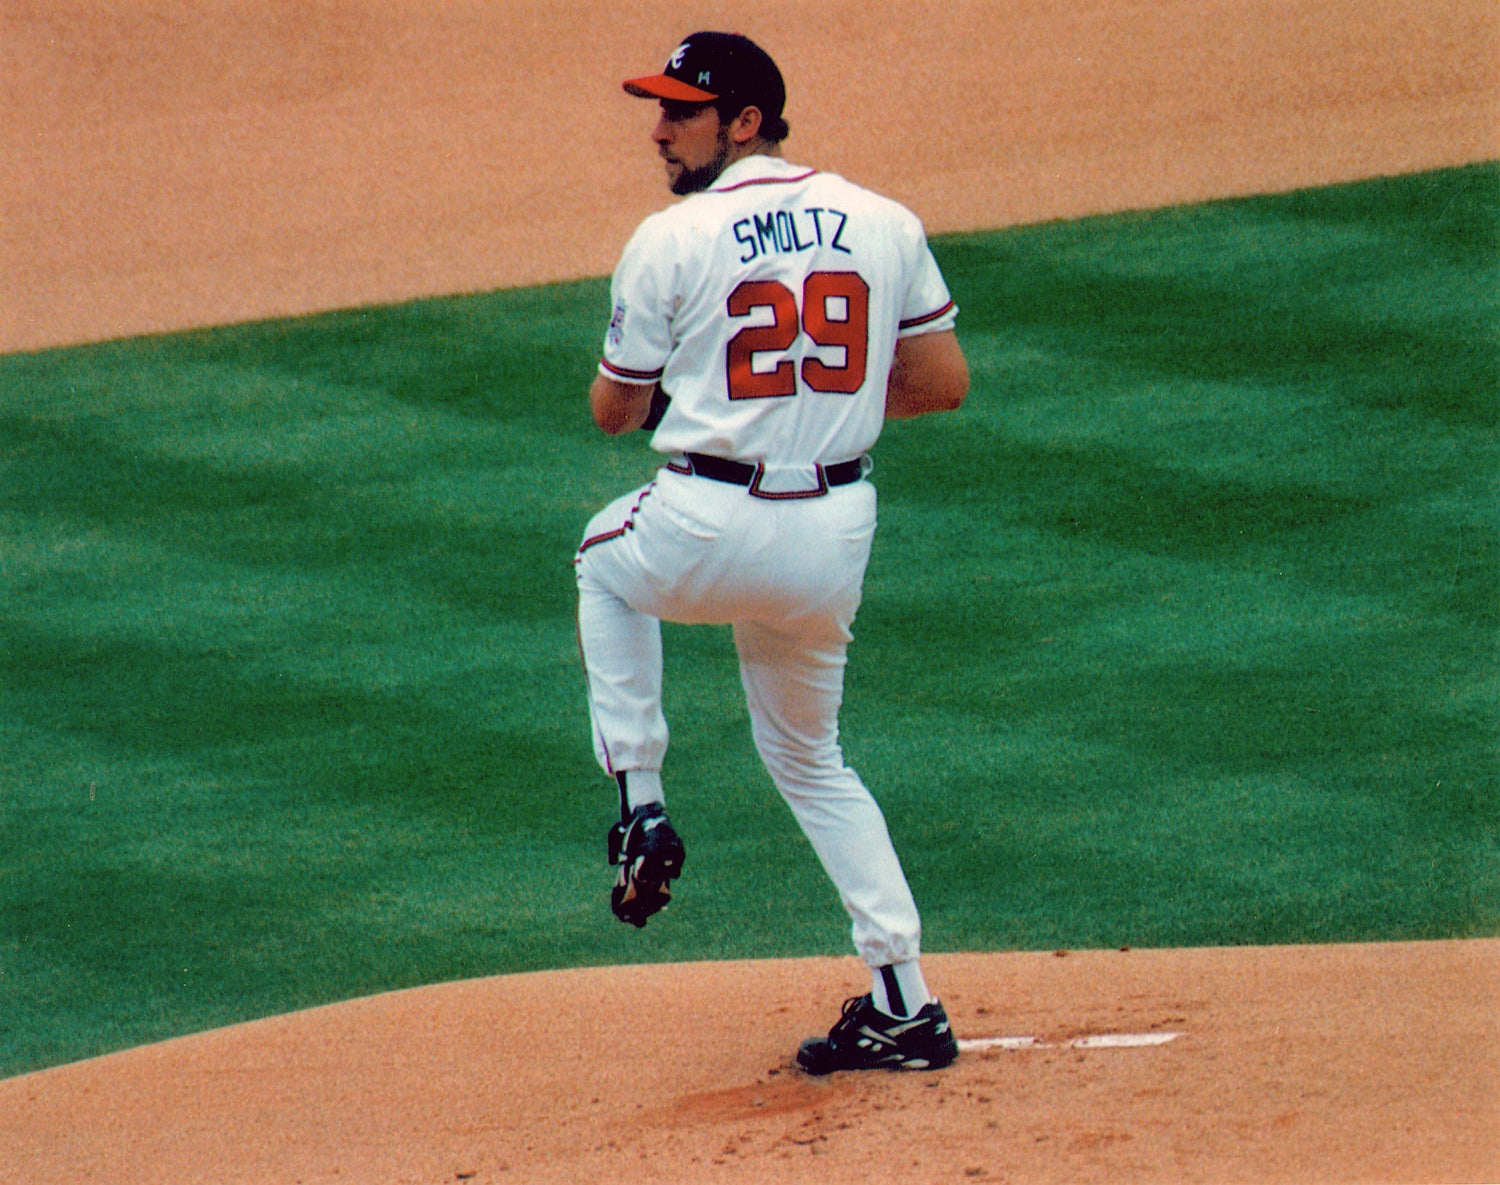 Smoltz’s 200th win set a new standard for pitchers